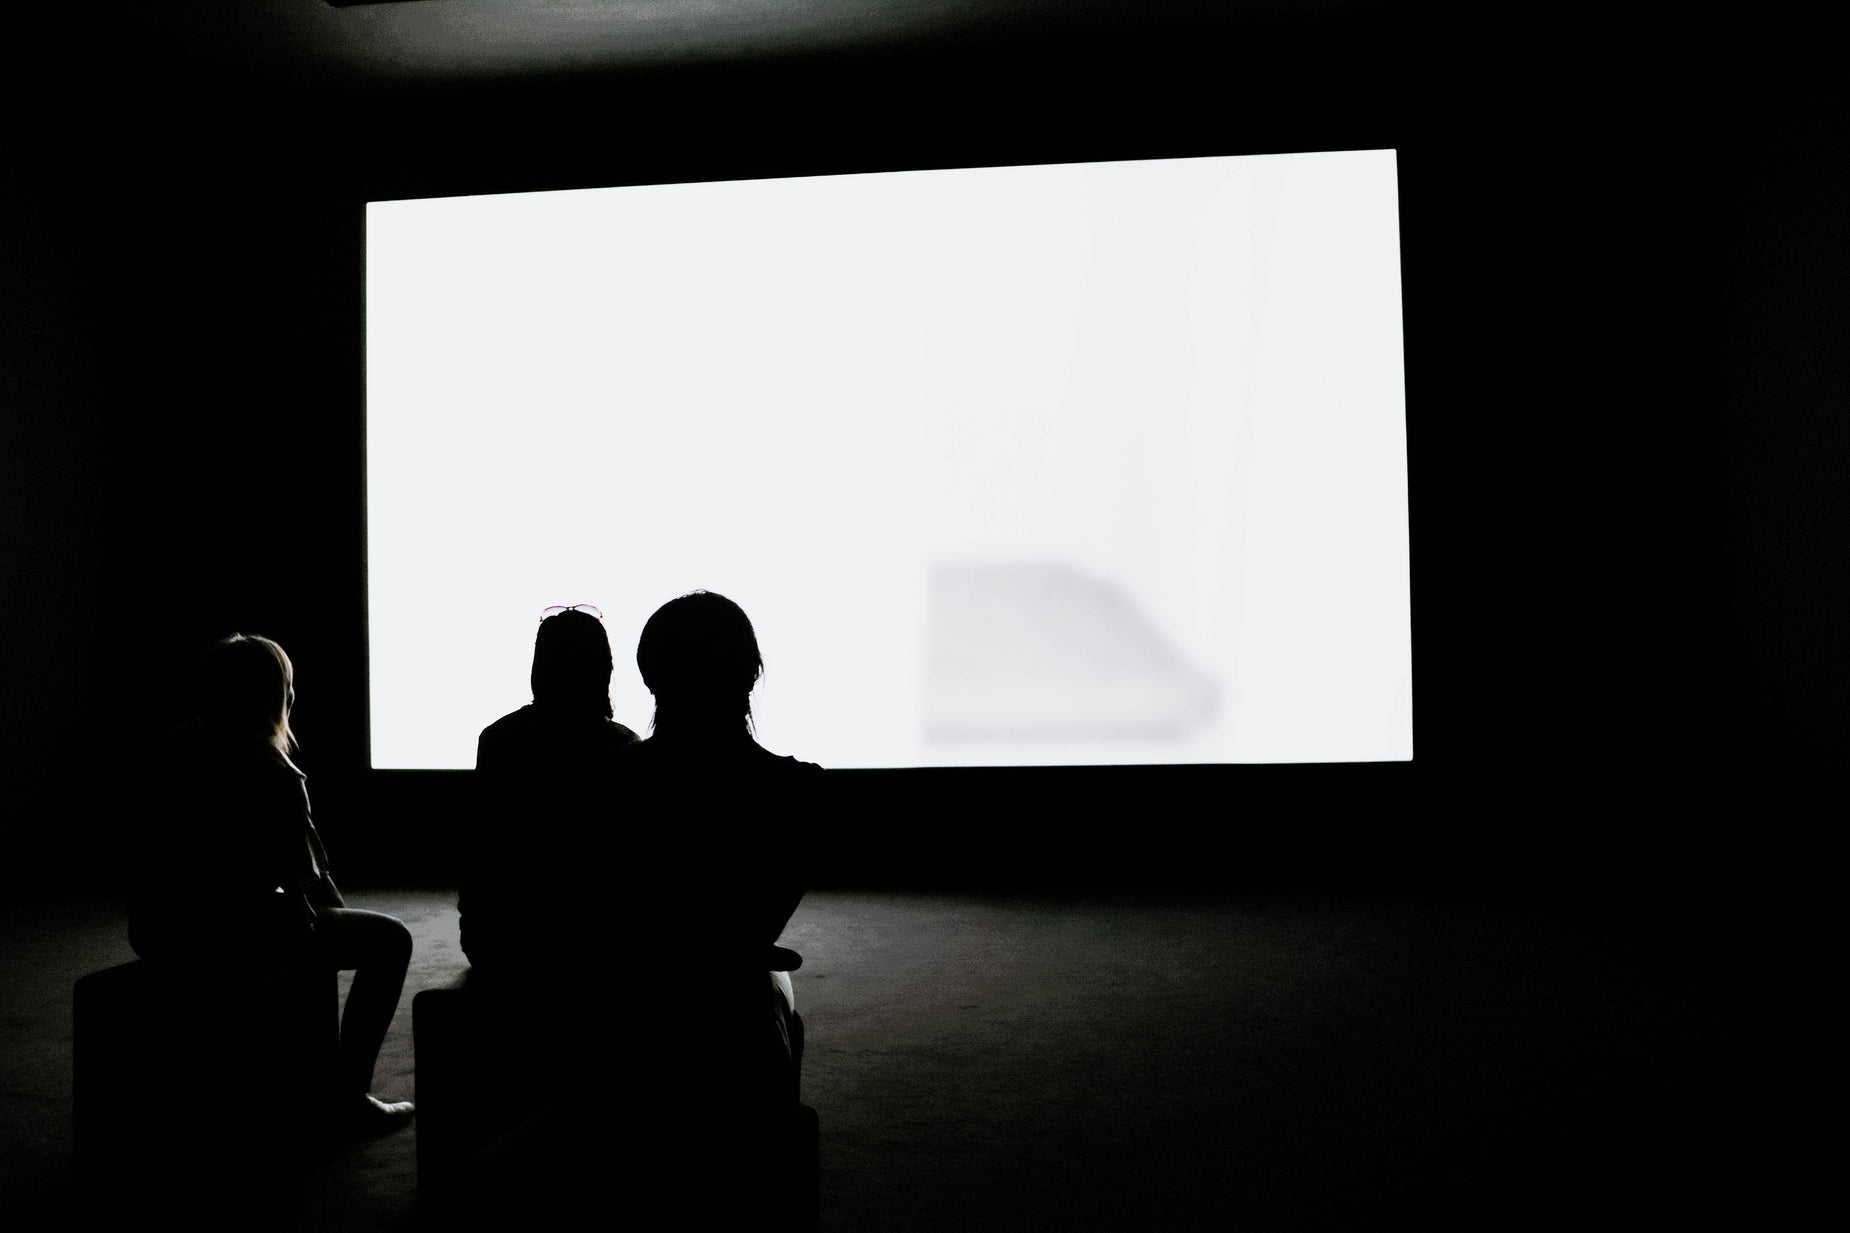 a group of people standing in front of a projection screen